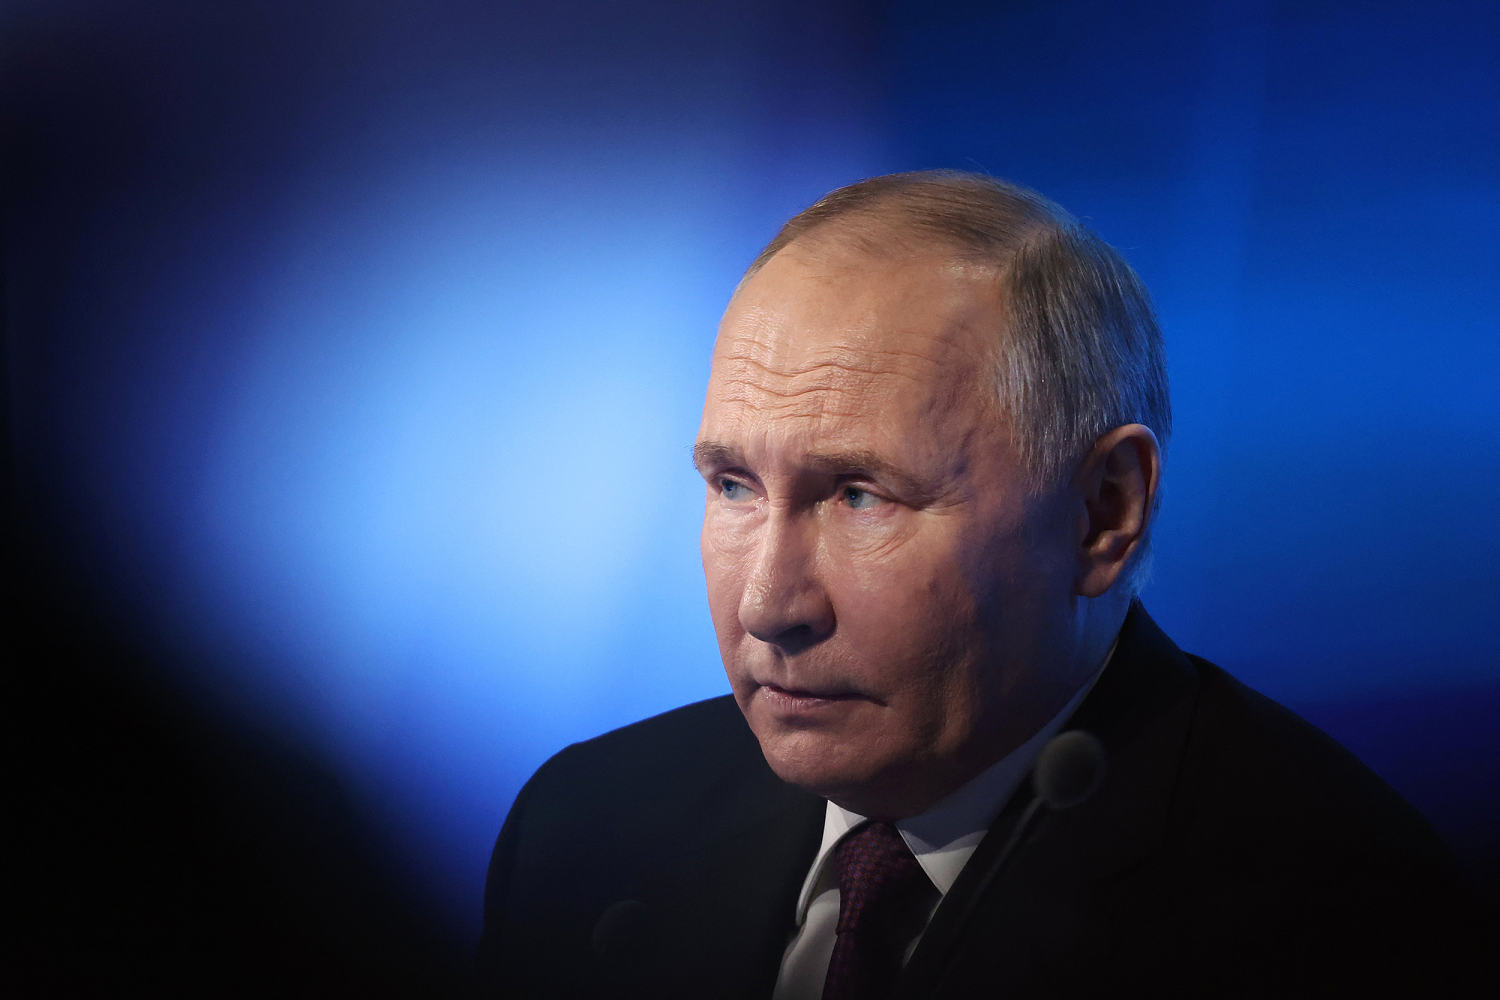 A surprise arrest and a corruption scandal hint at splits in Putin's inner circle